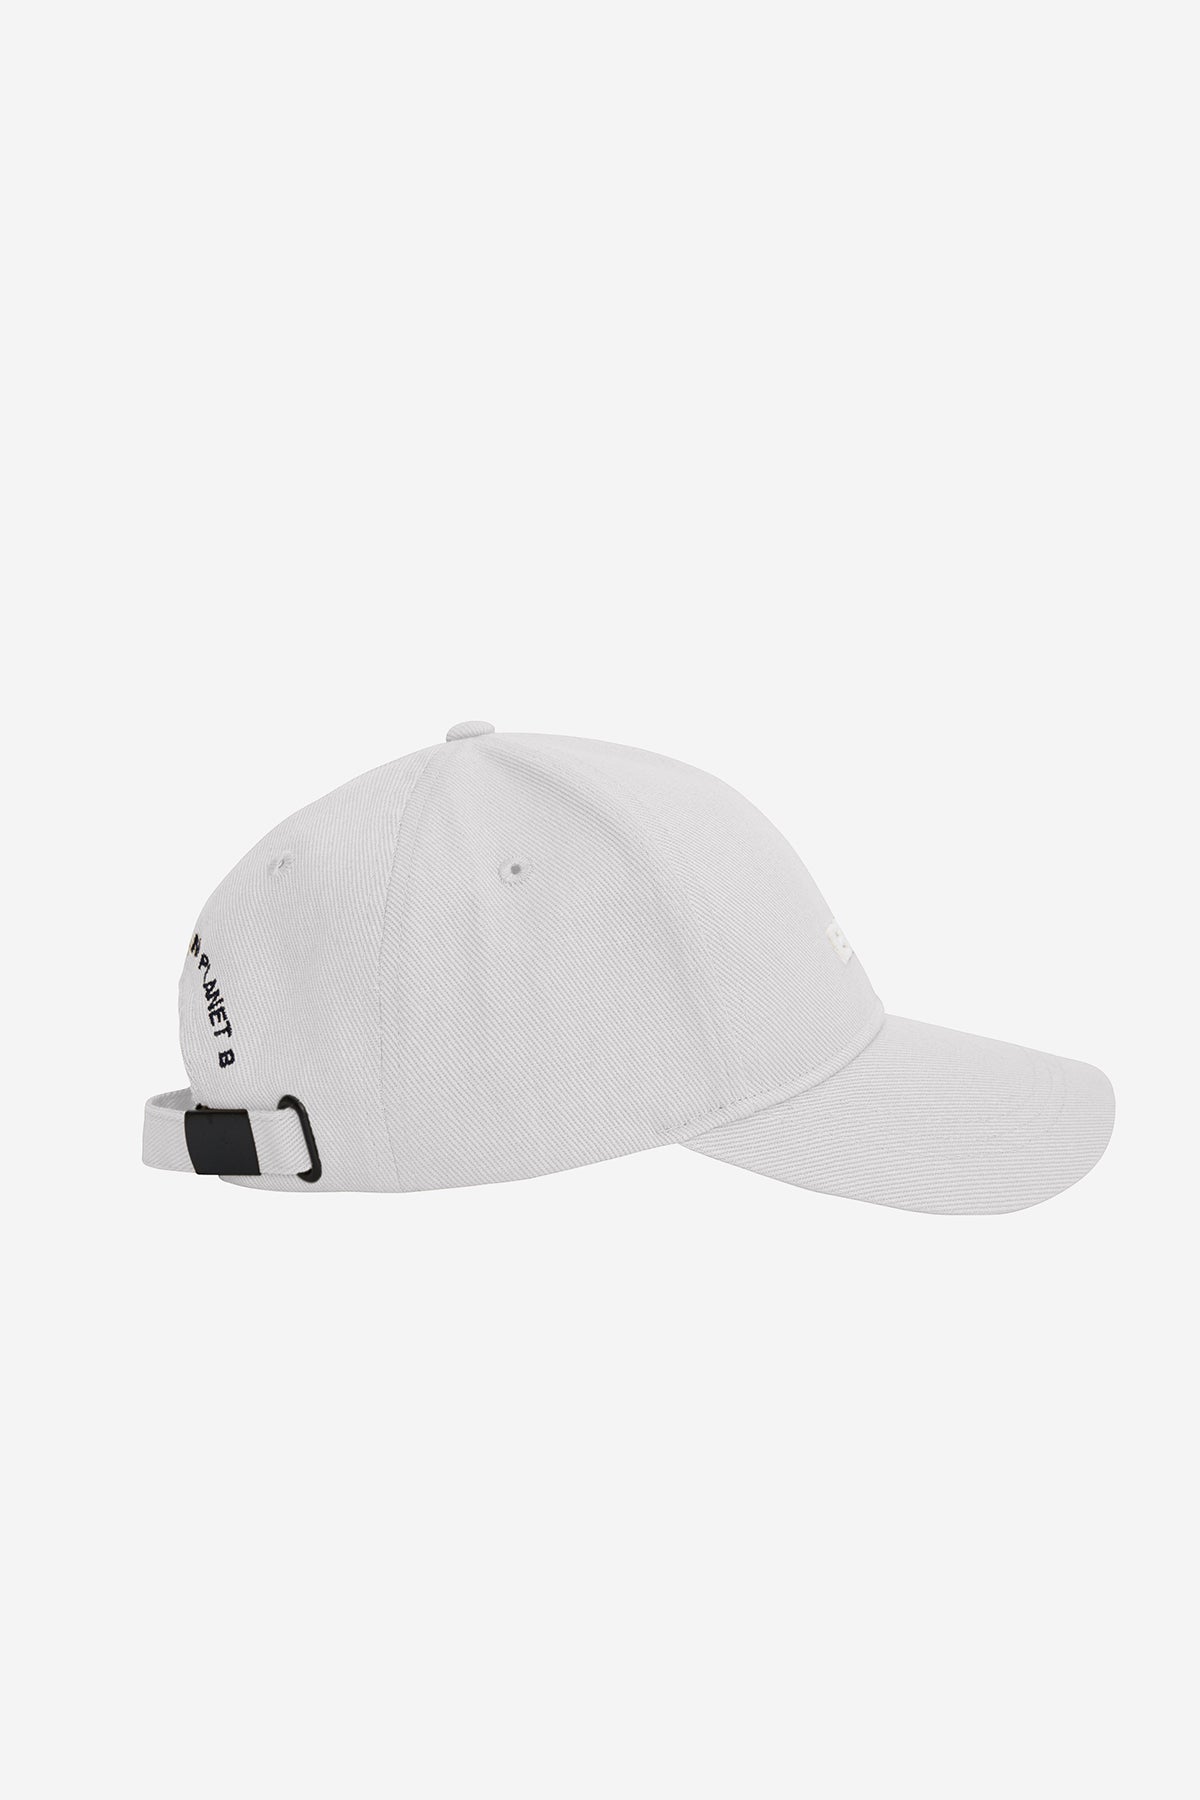 EMBROIDERED CAP WHITE